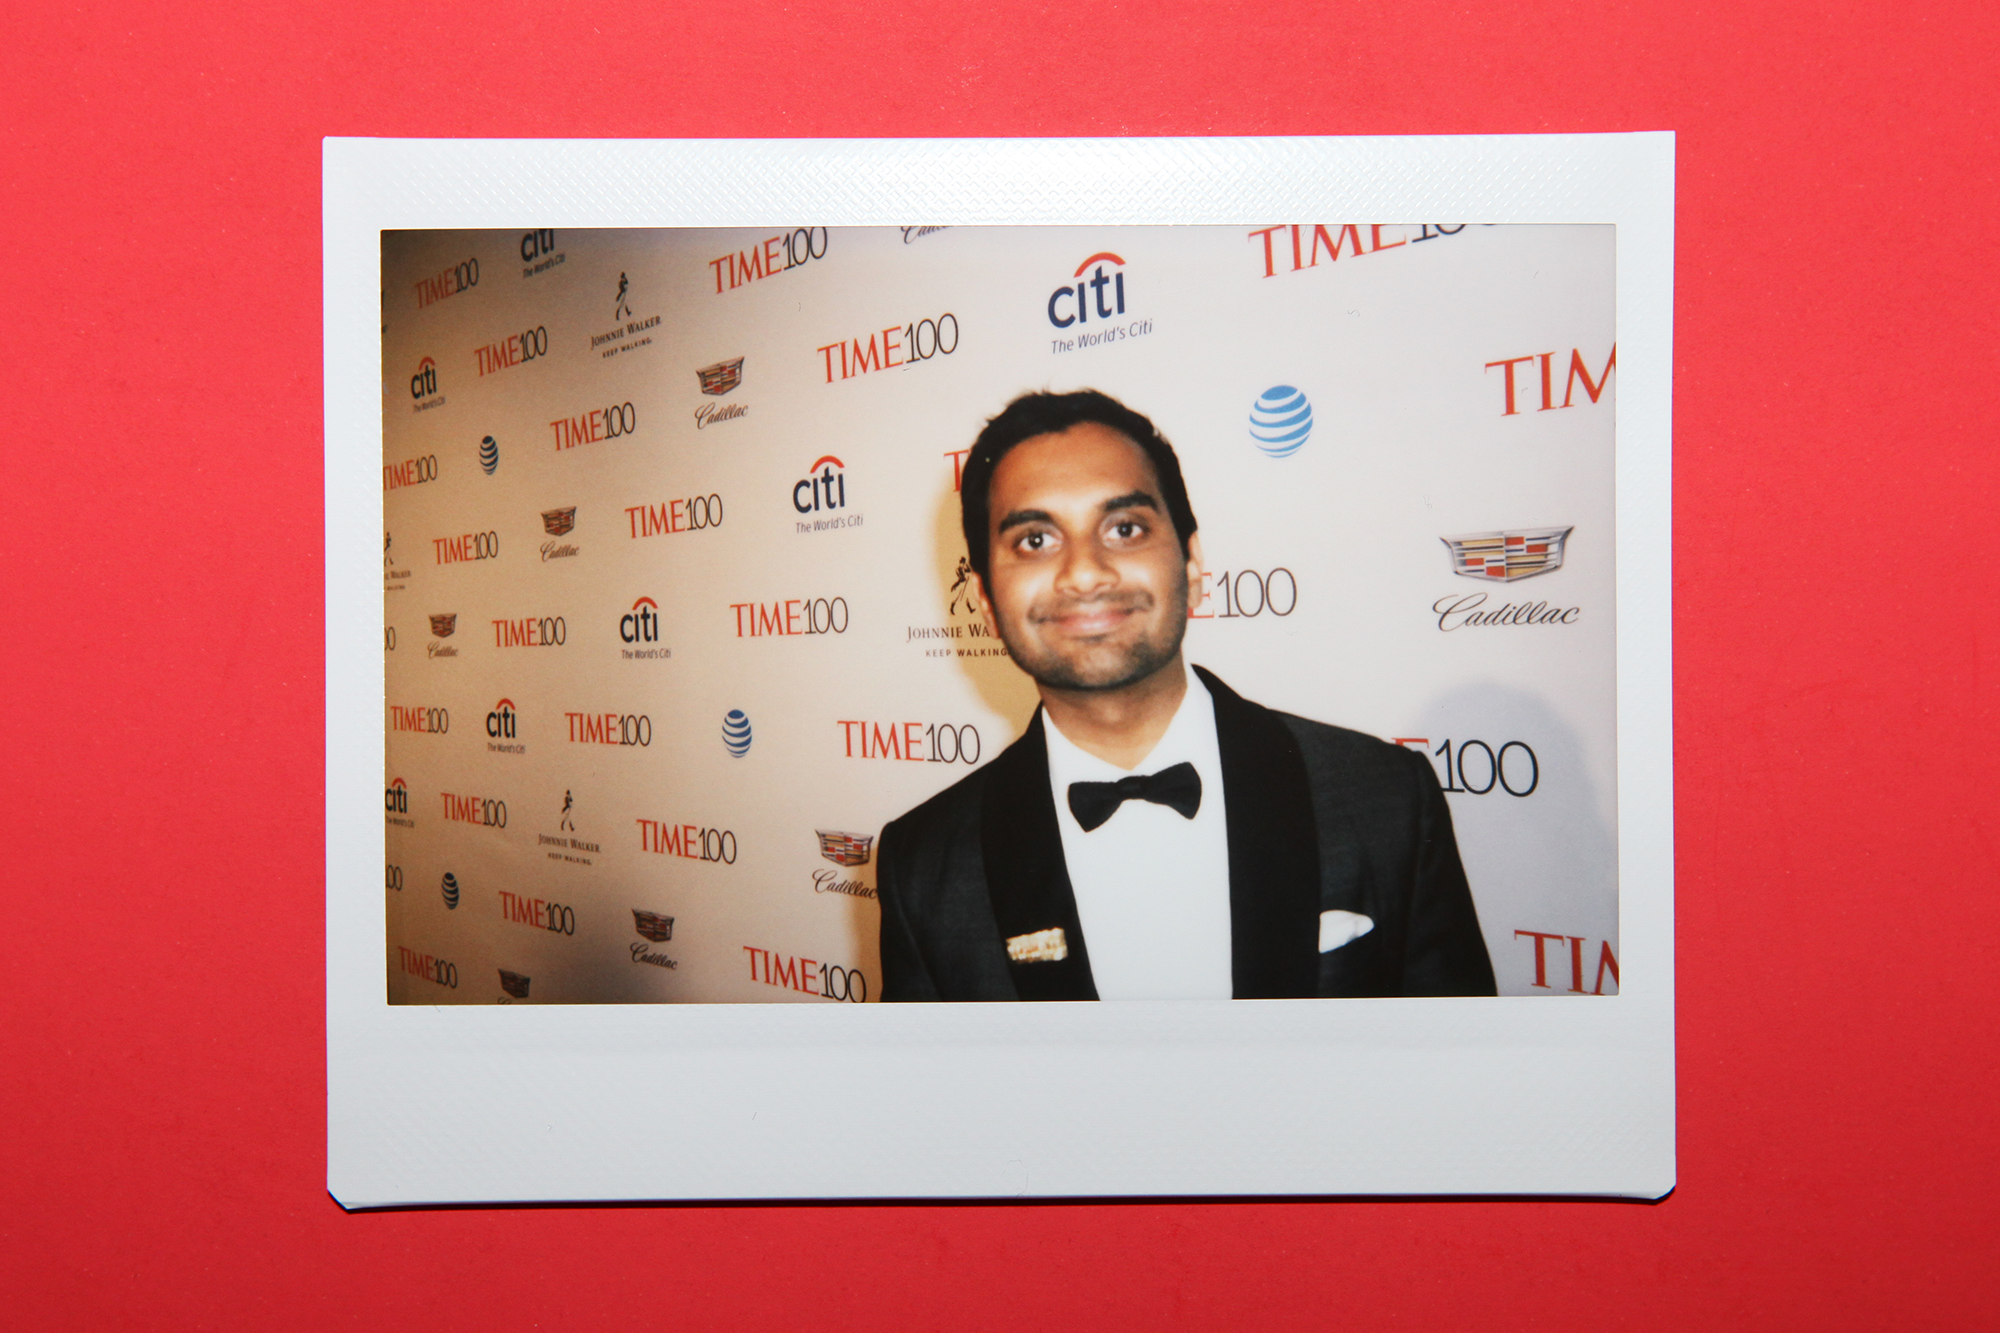 Aziz Ansari arrives at the TIME 100 Gala at the Time Warner Center on April 26, 2016 in New York City.